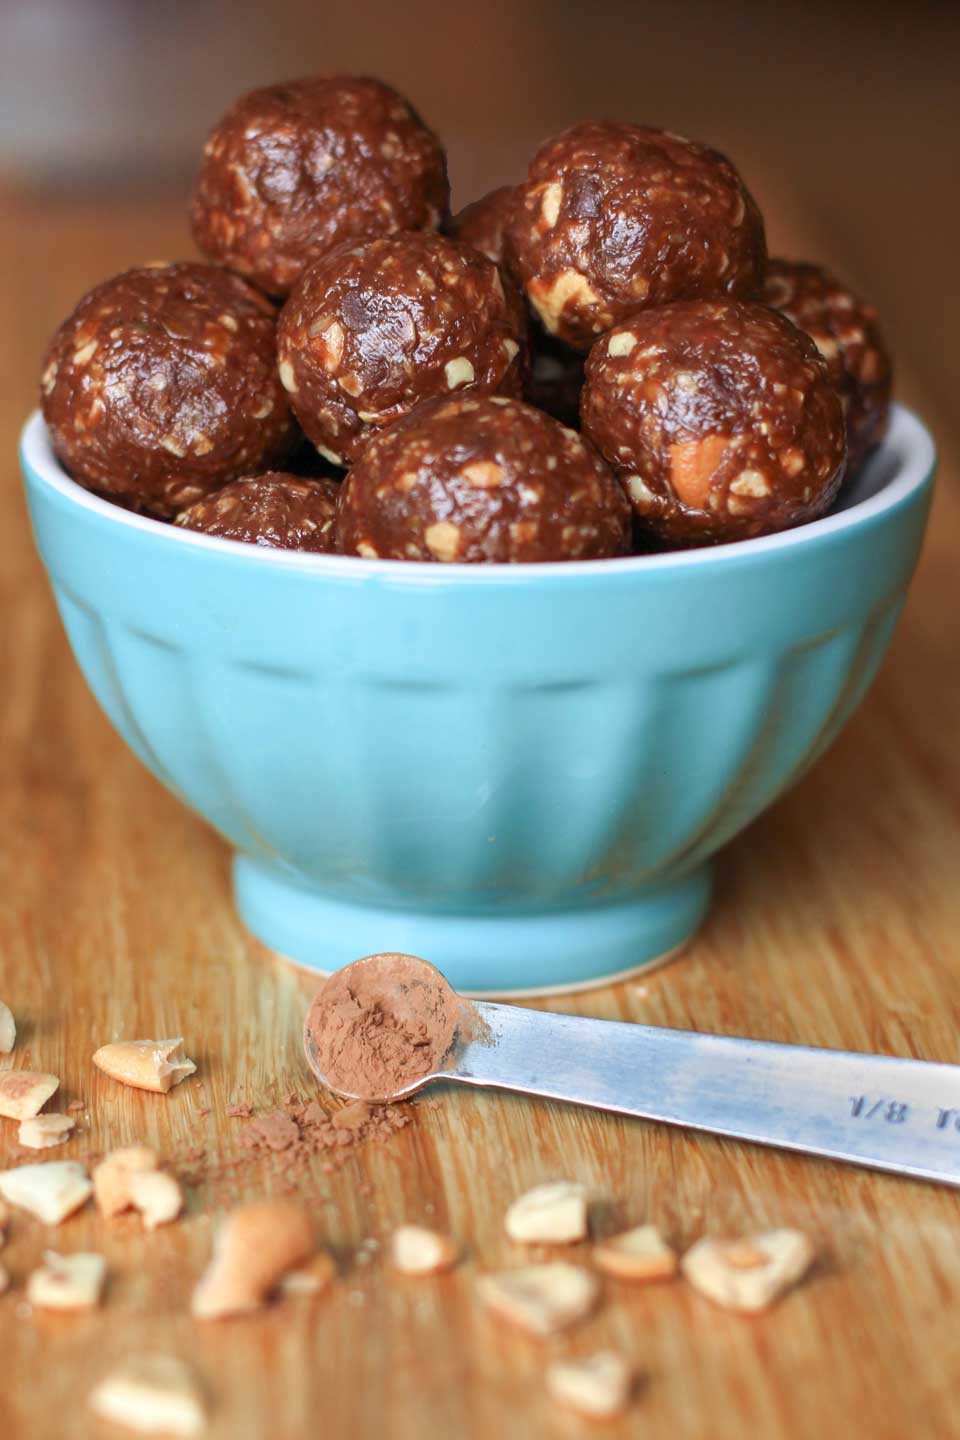 A batch of balls in a turquoise bowl with measuring spoon of cocoa powder and chopped peanuts in front of it.